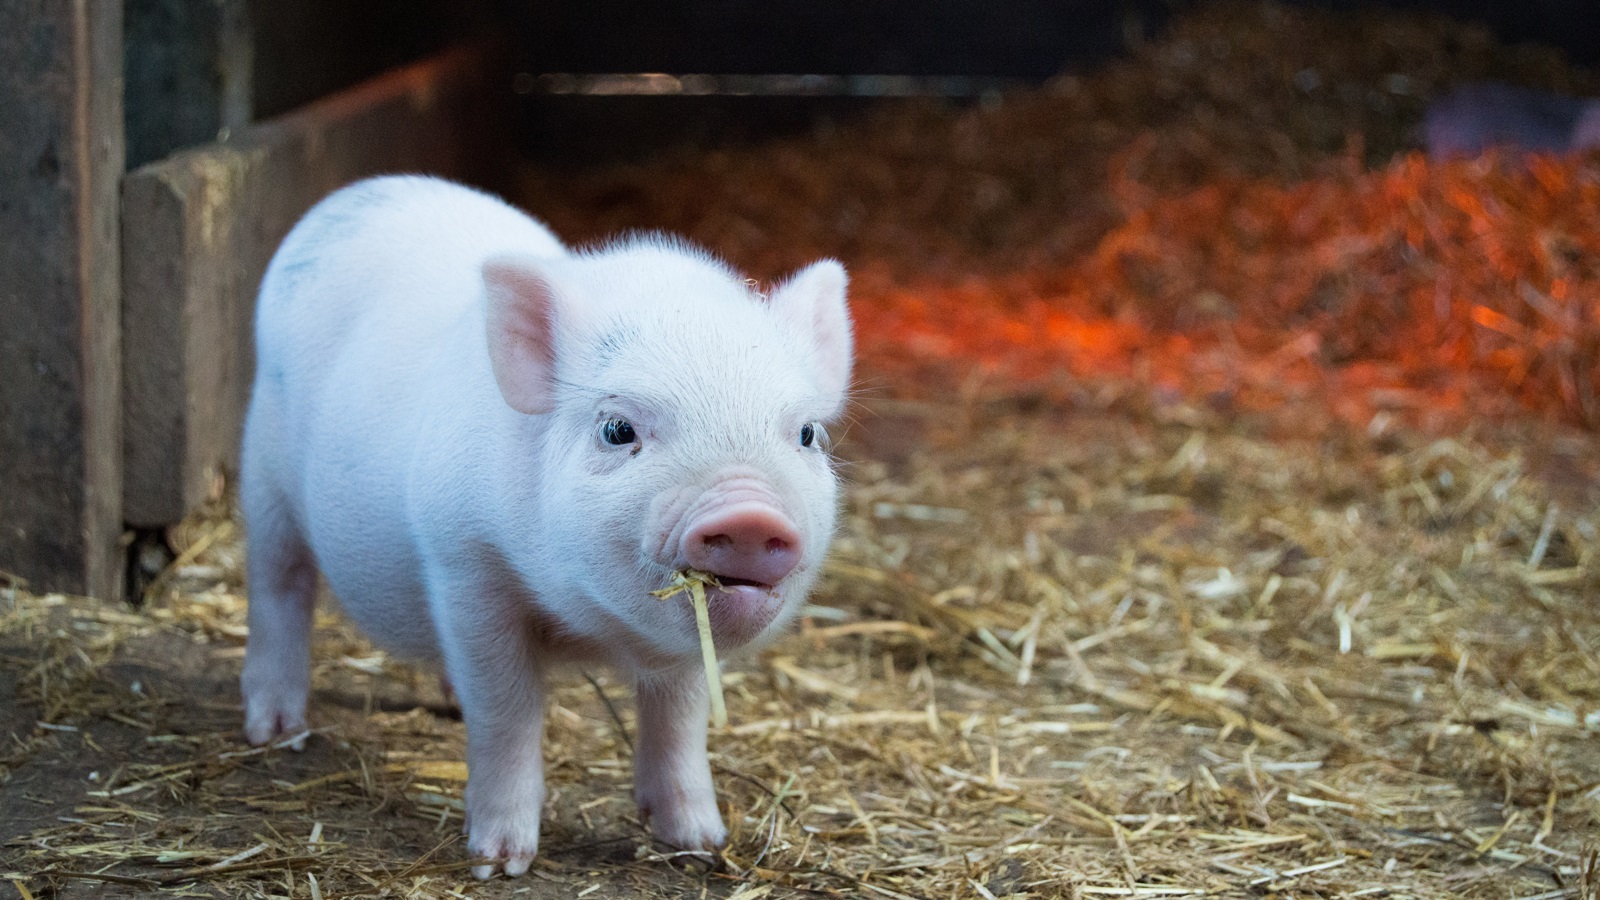 A tiny pig eating hay